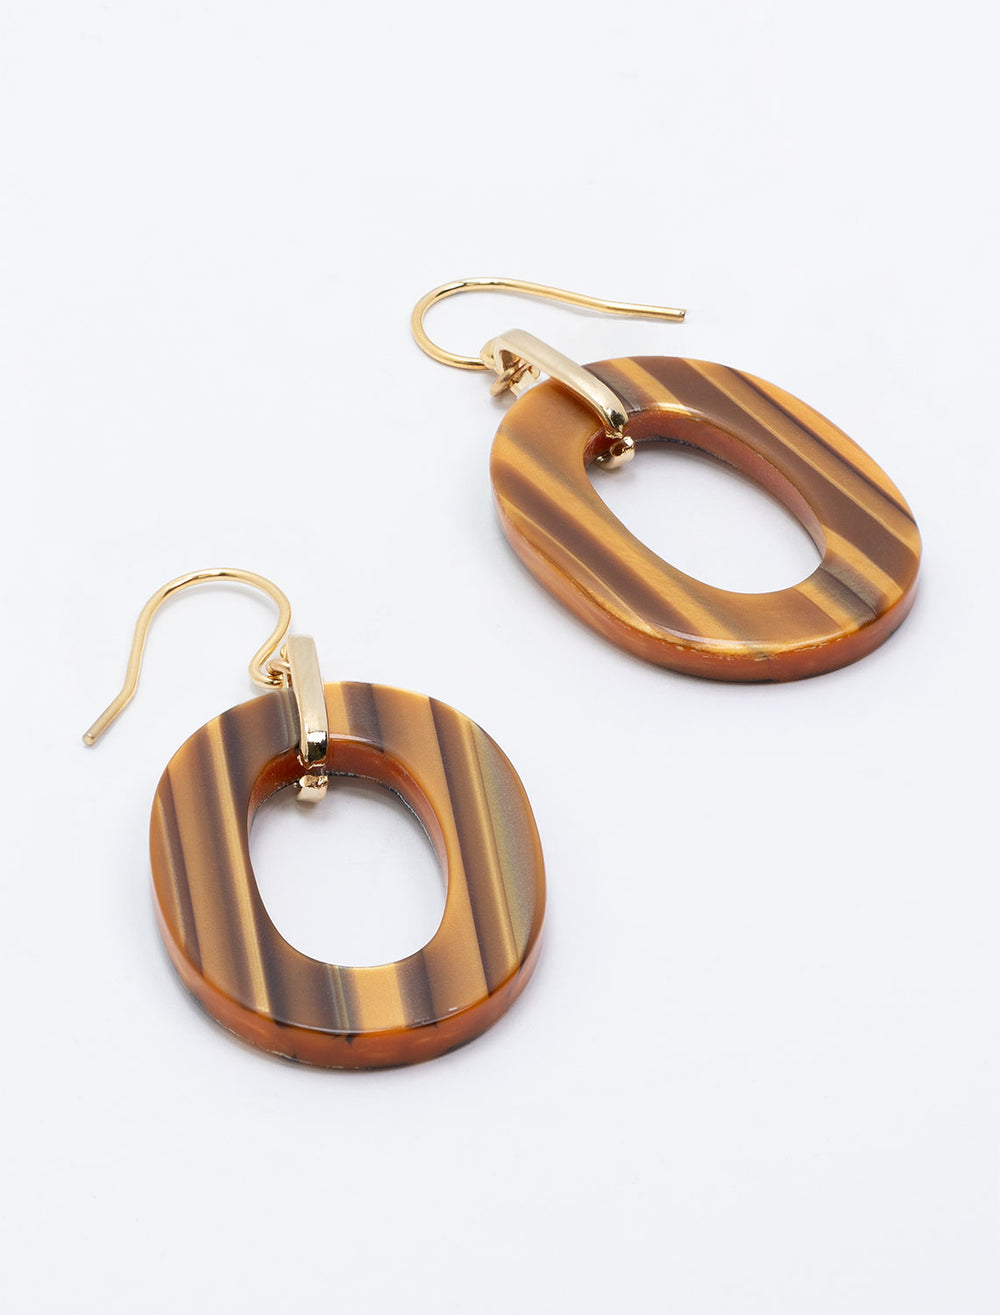 Laydown of West Eleventh's oval acacia link earrings.